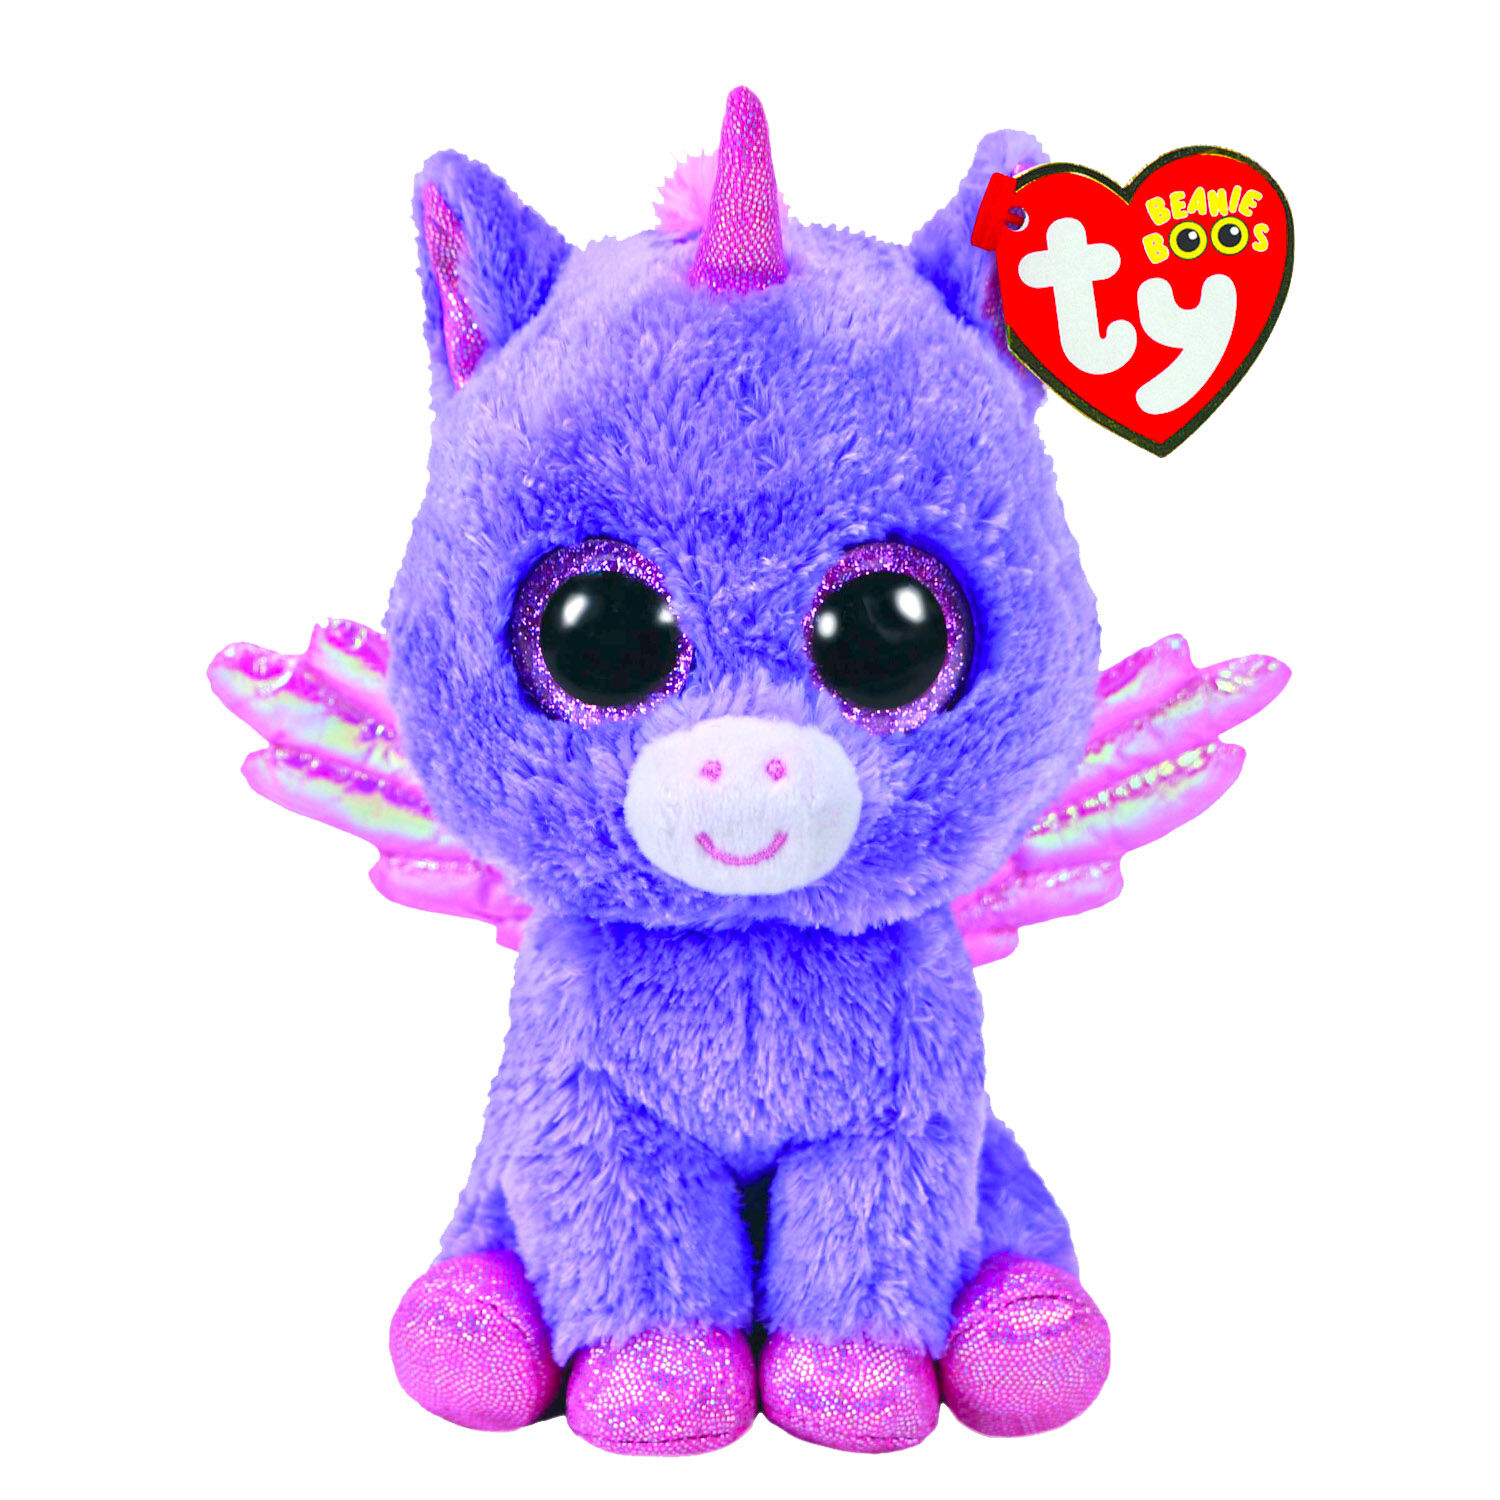 ATHENA THE BEAUTIFUL PEGASUS BEANIE BOO CLIP  CLAIRS EXCLUSIVE 3 IN MWMT 